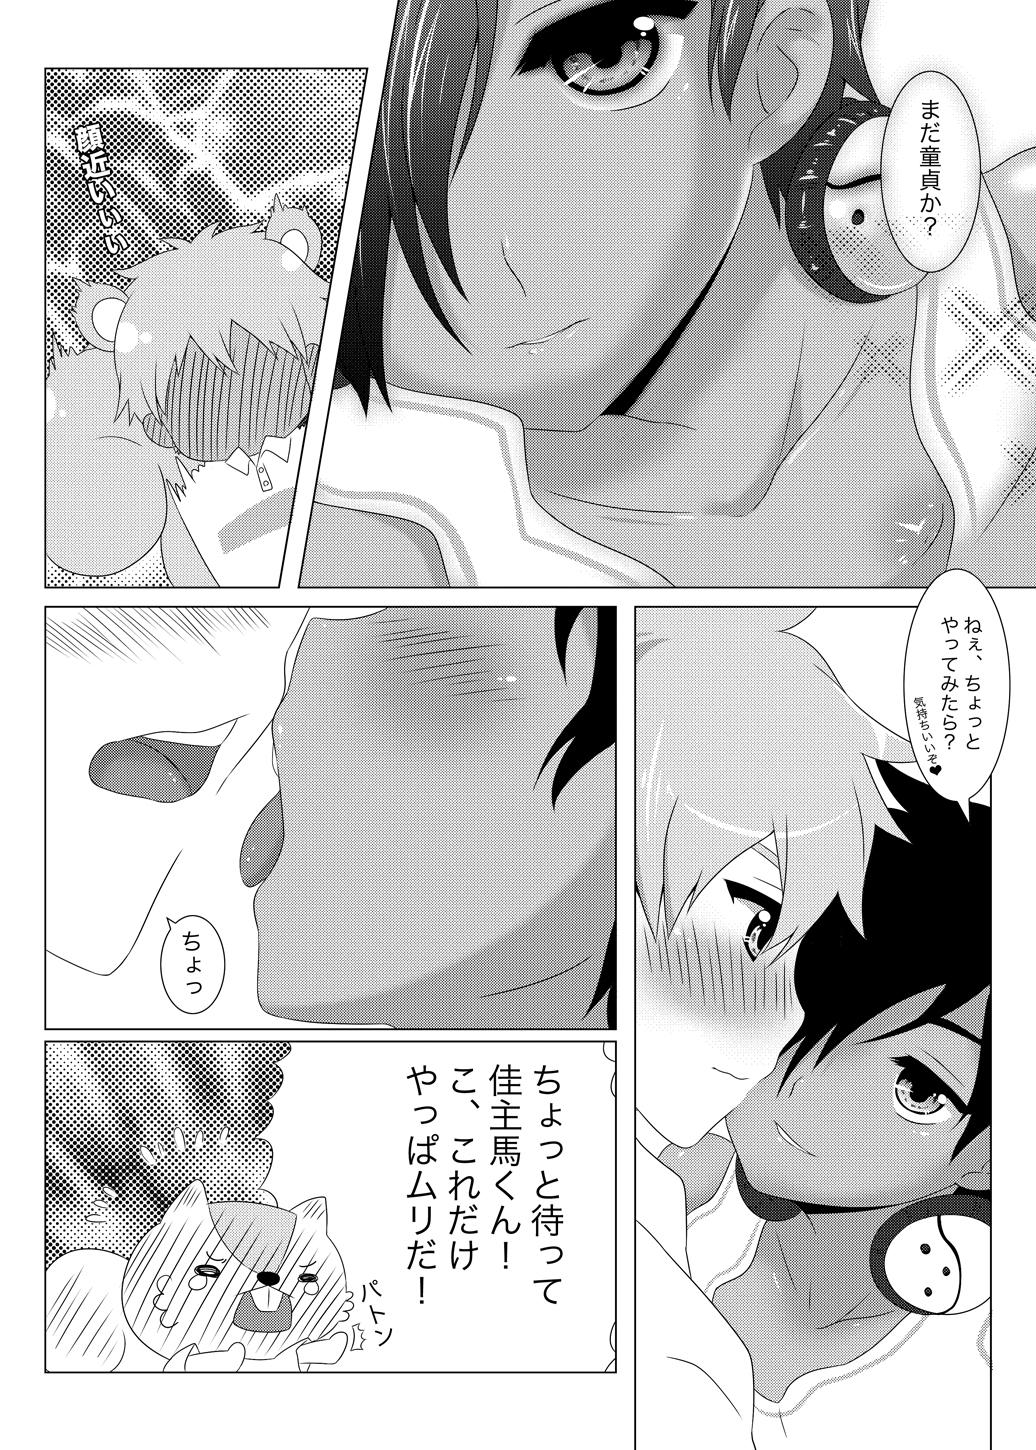 Chile Another Summer 2 - Summer wars Twink - Page 3